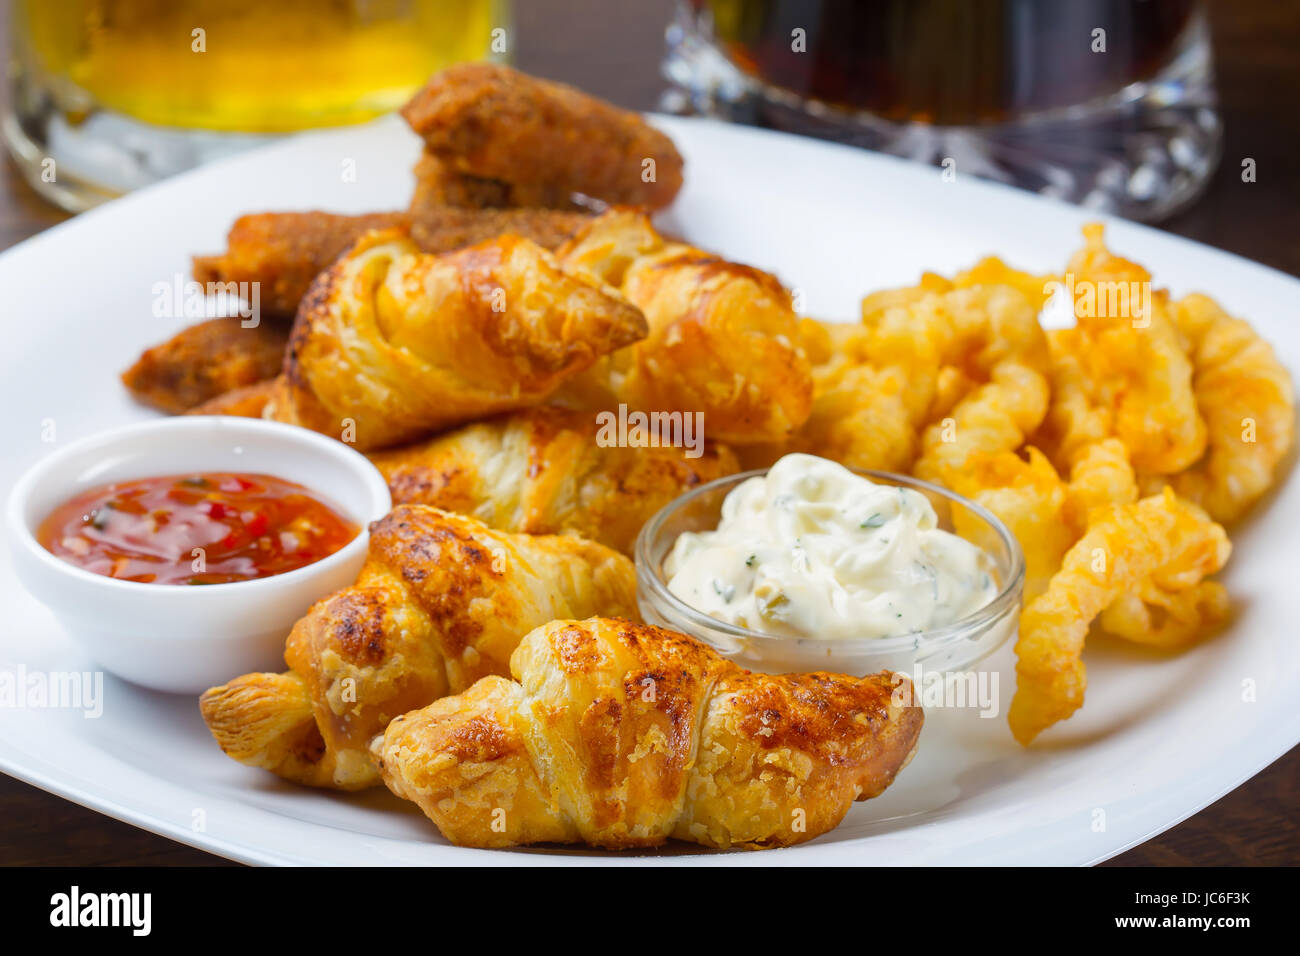 Fresh golden croissants with jams for breakfast Stock Photo